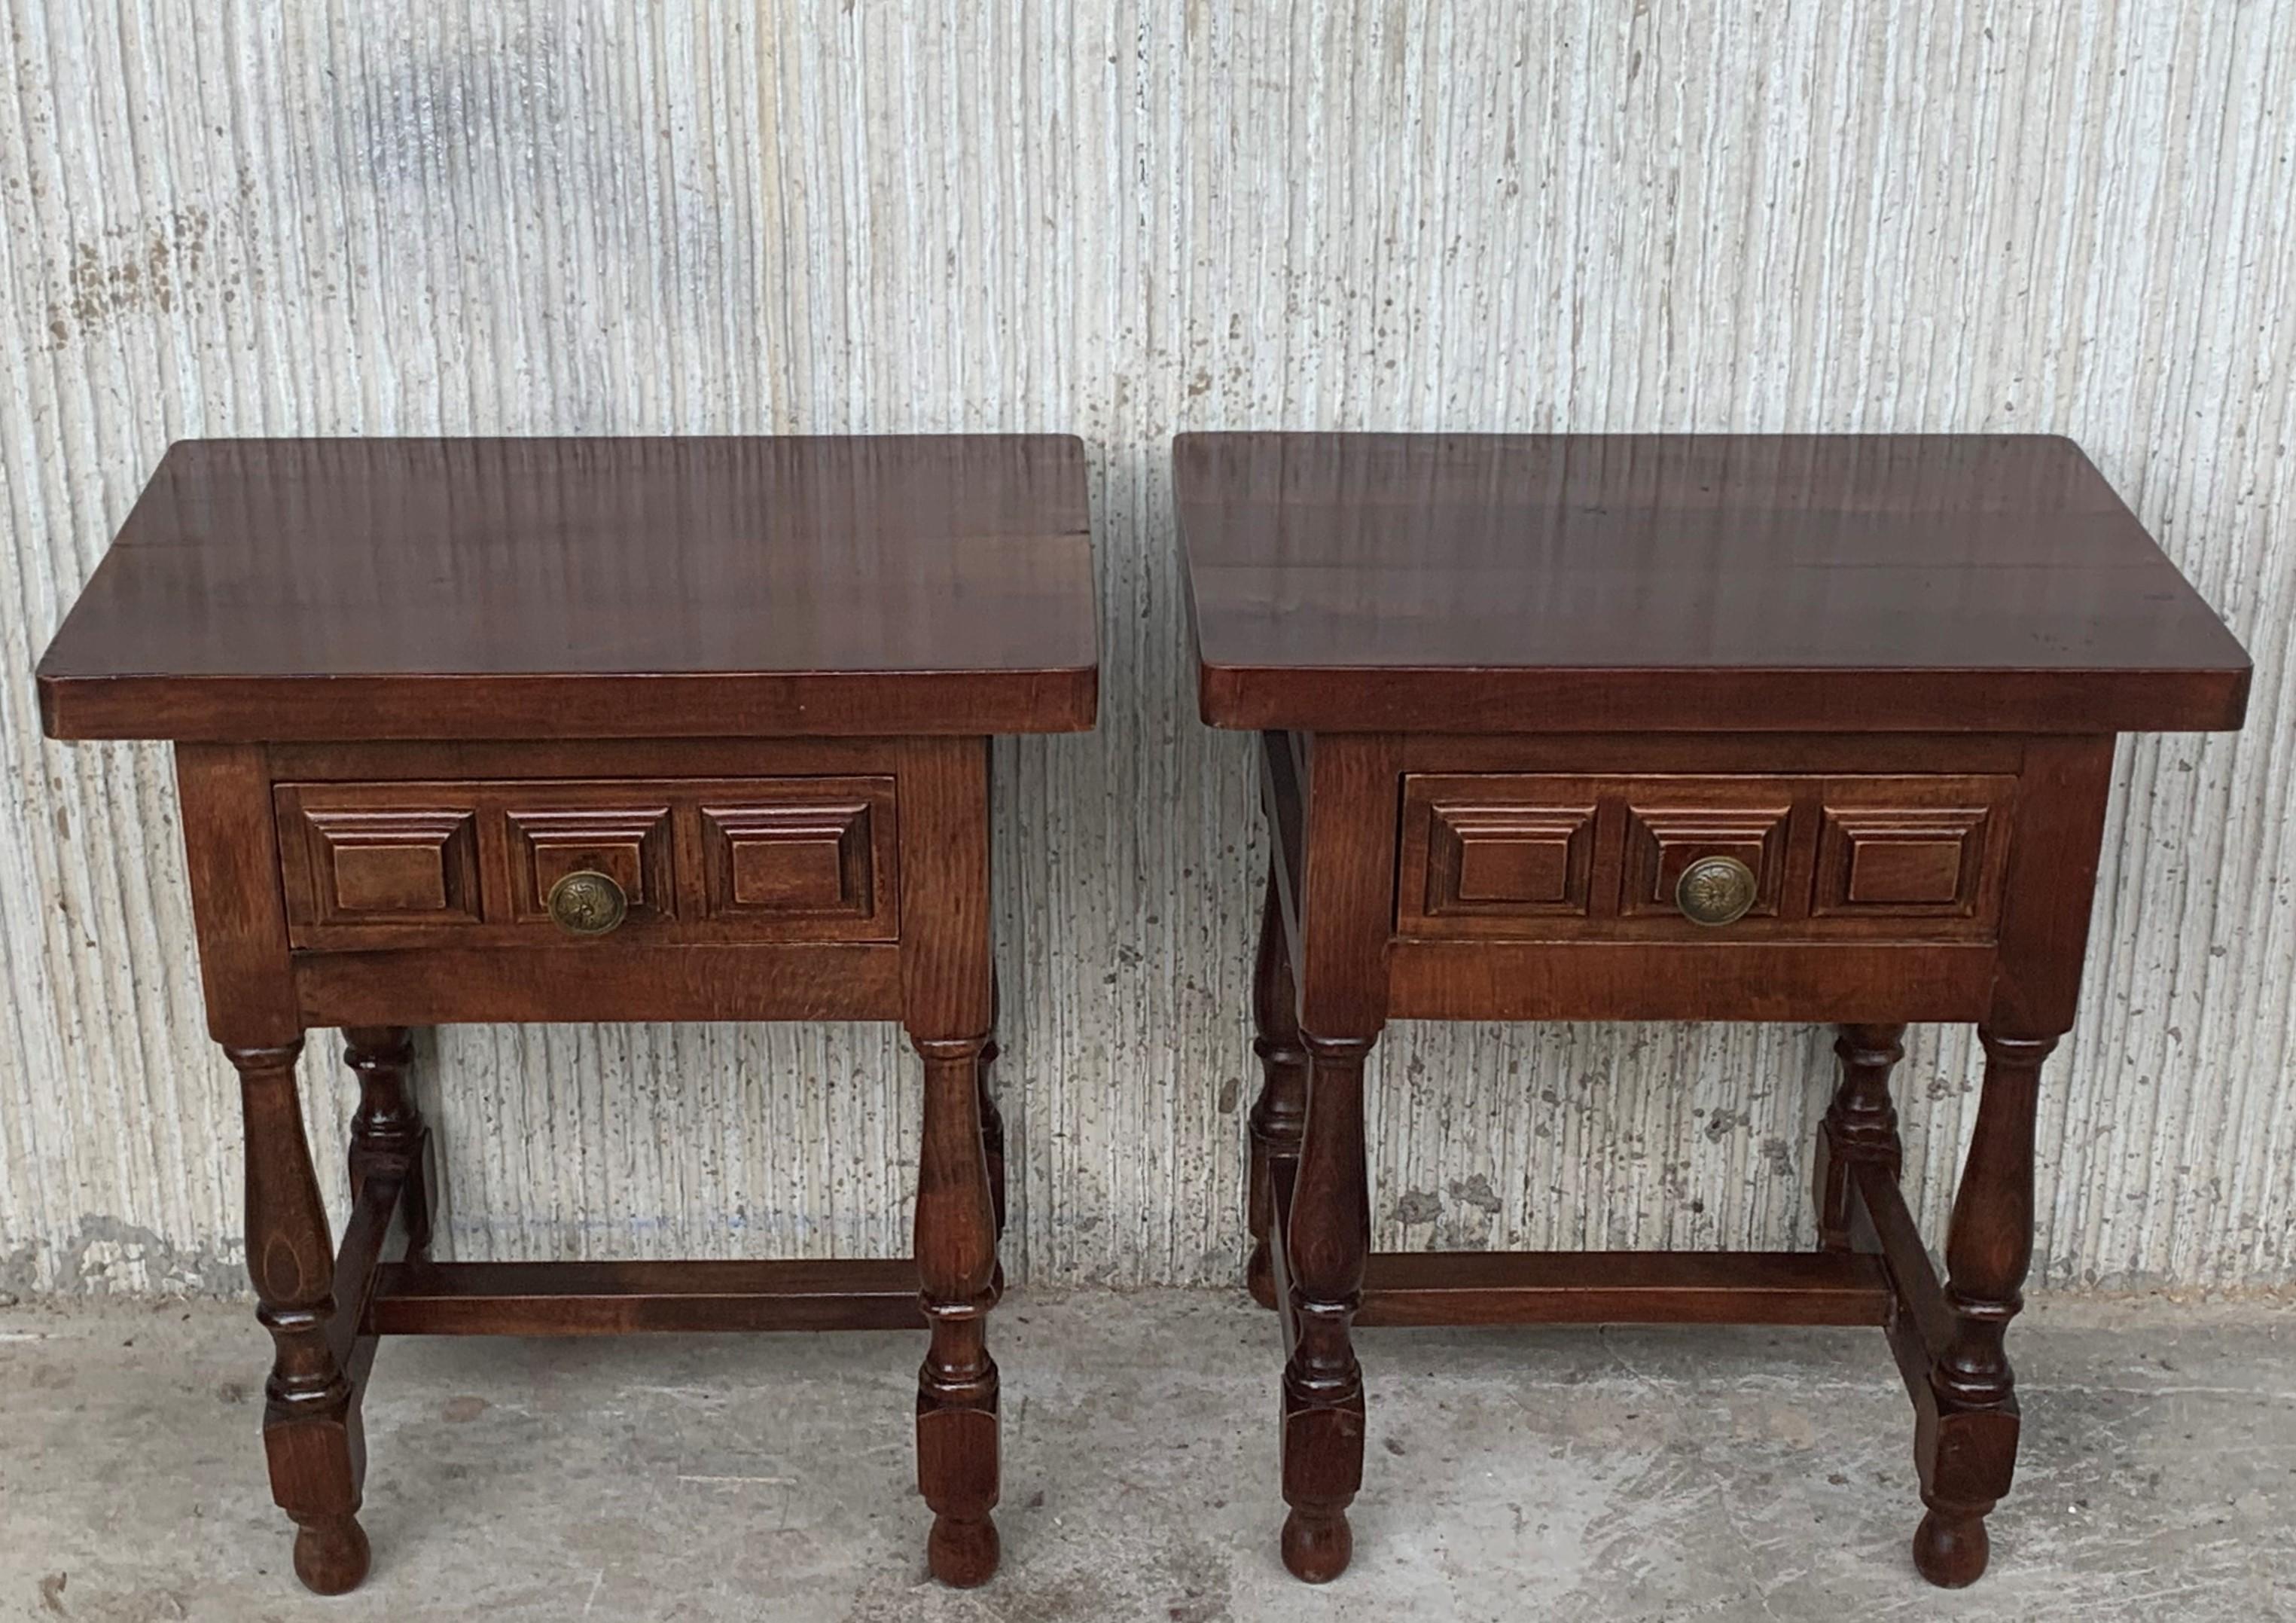 20th century pair of Spanish nightstands with drawer and bronze hardware.
Beautiful tables that you can use like a nightstands or side tables, end tables, or table lamp.
It´s a big and heavy solid table.